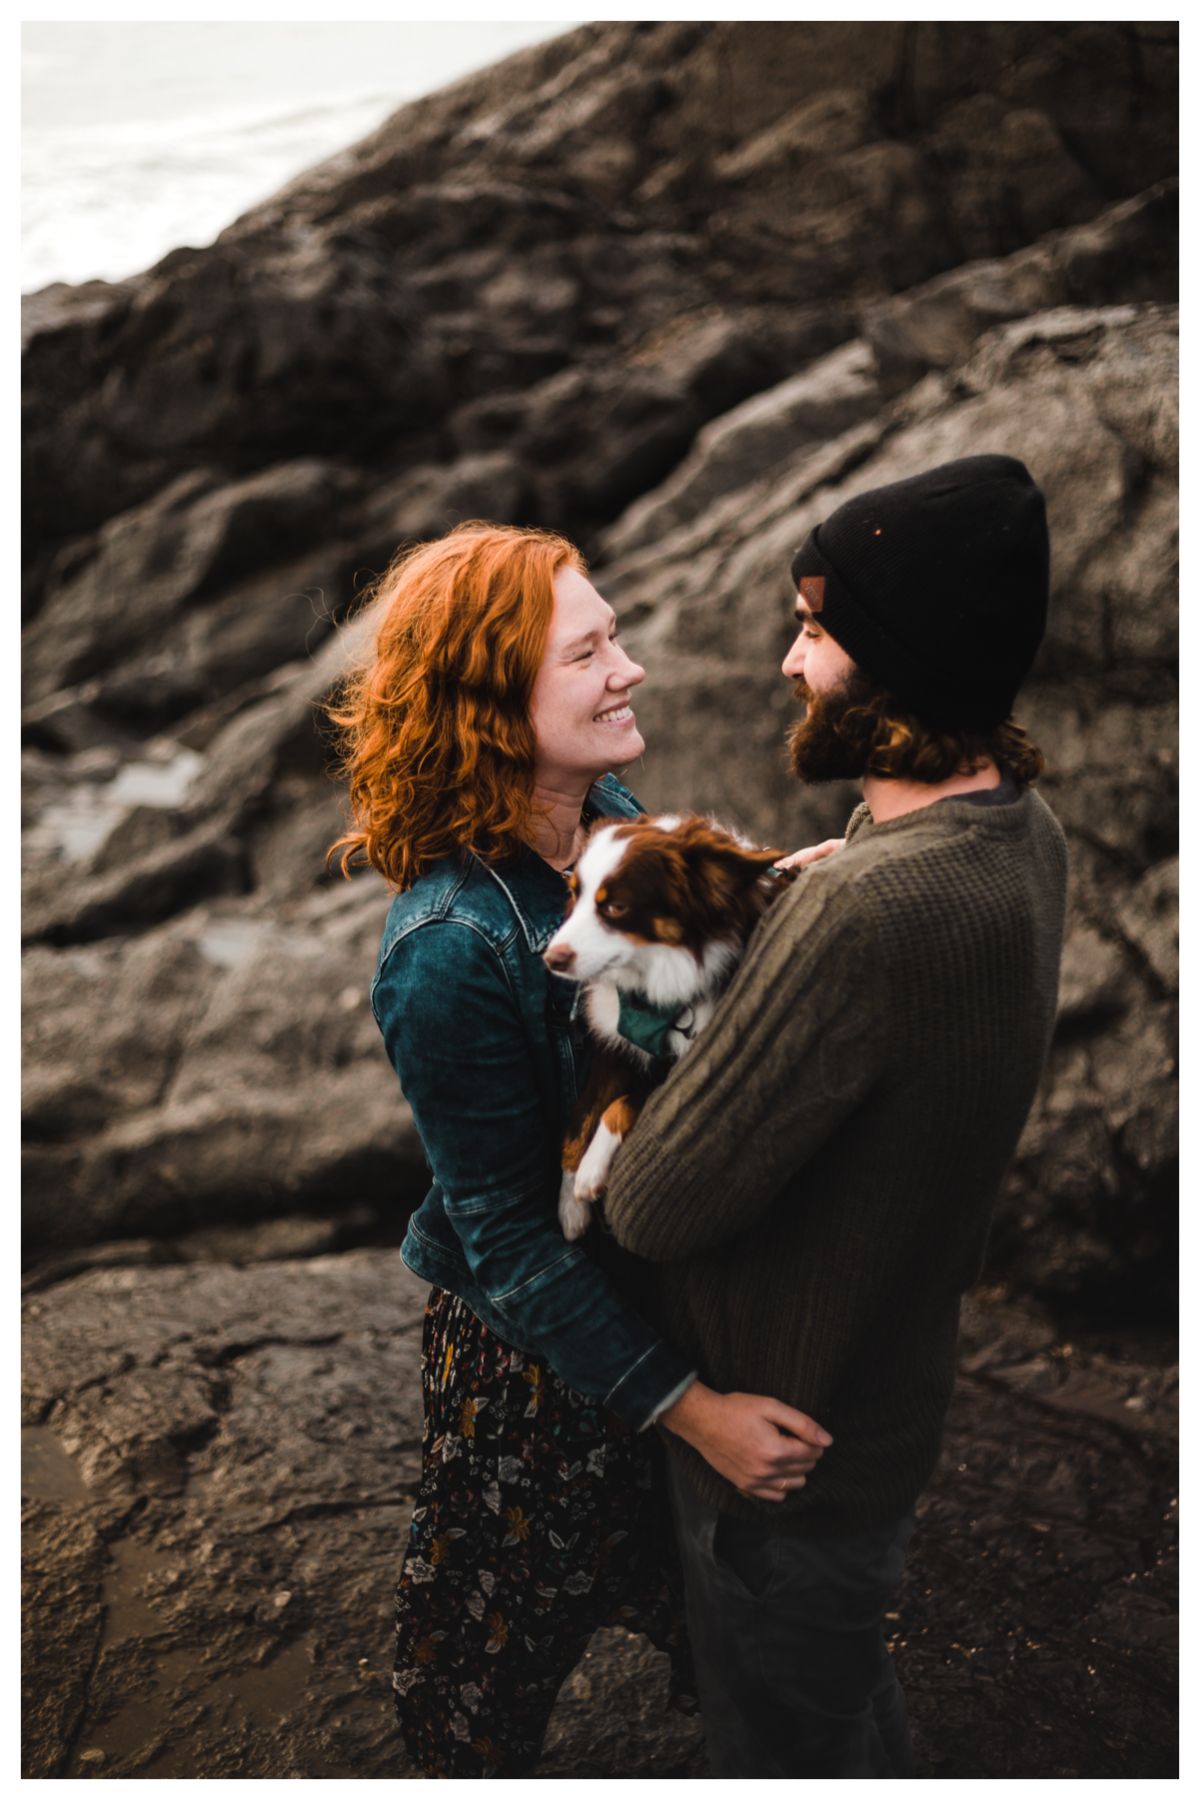 Tofino wedding photographer for a destination engagement photography session on Vancouver Island, BC - Image 11